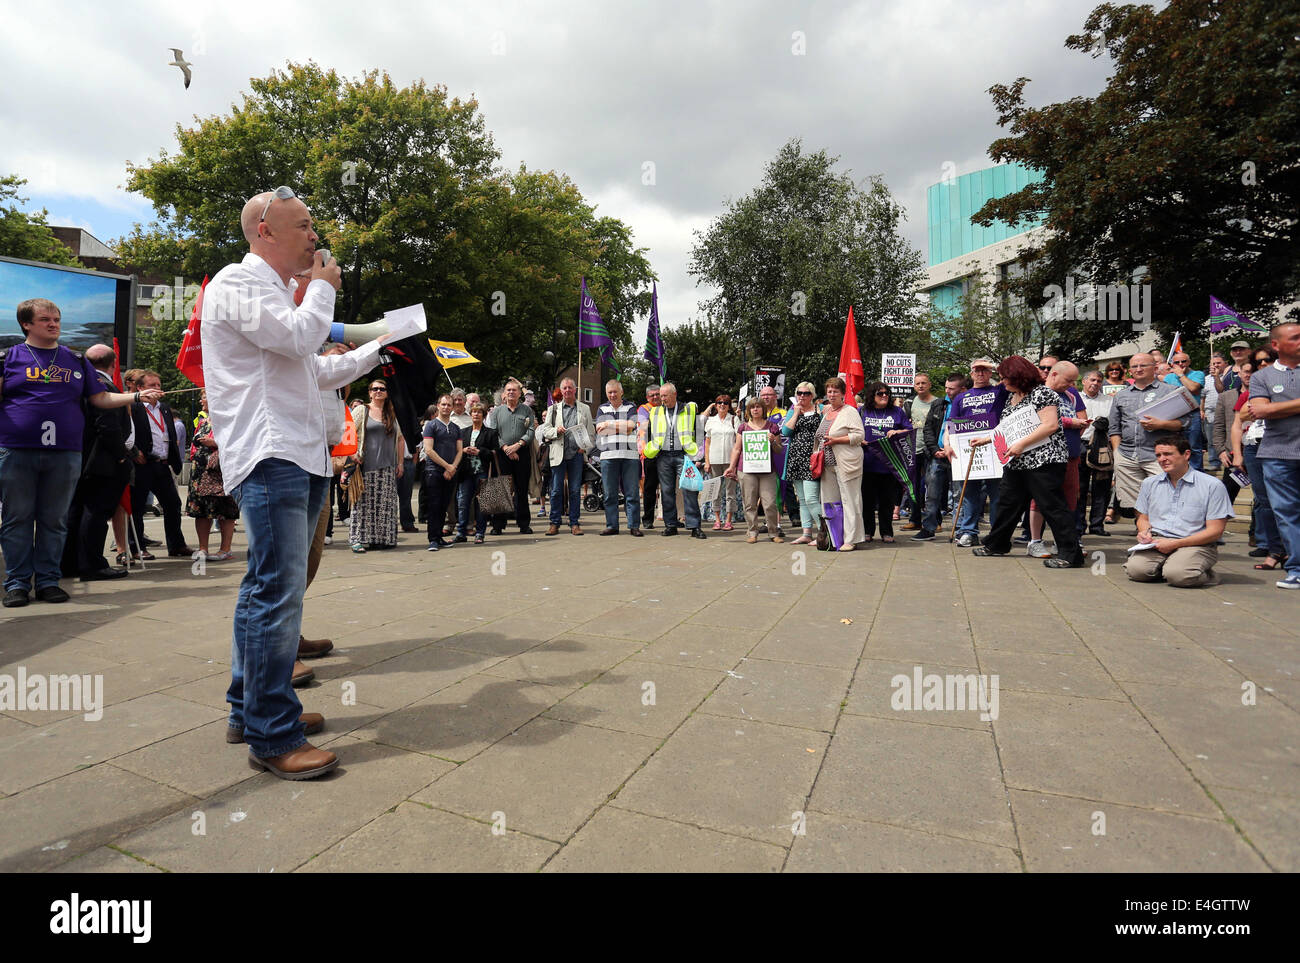 Swansea, UK. 10th July, 2014.  Pictured: Cerith Griffiths of the FBU speaking at Castle Square Gardens, Swansea, south Wales.  Re: Strikes are taking place across the UK in a series of disputes with the government over pay, pensions and cuts, with more than a million public sector workers expected to join the action.  Firefighters, librarians and council staff are among those taking part from several trade unions, with rallies taking place across the UK. Credit:  D Legakis/Alamy Live News Stock Photo